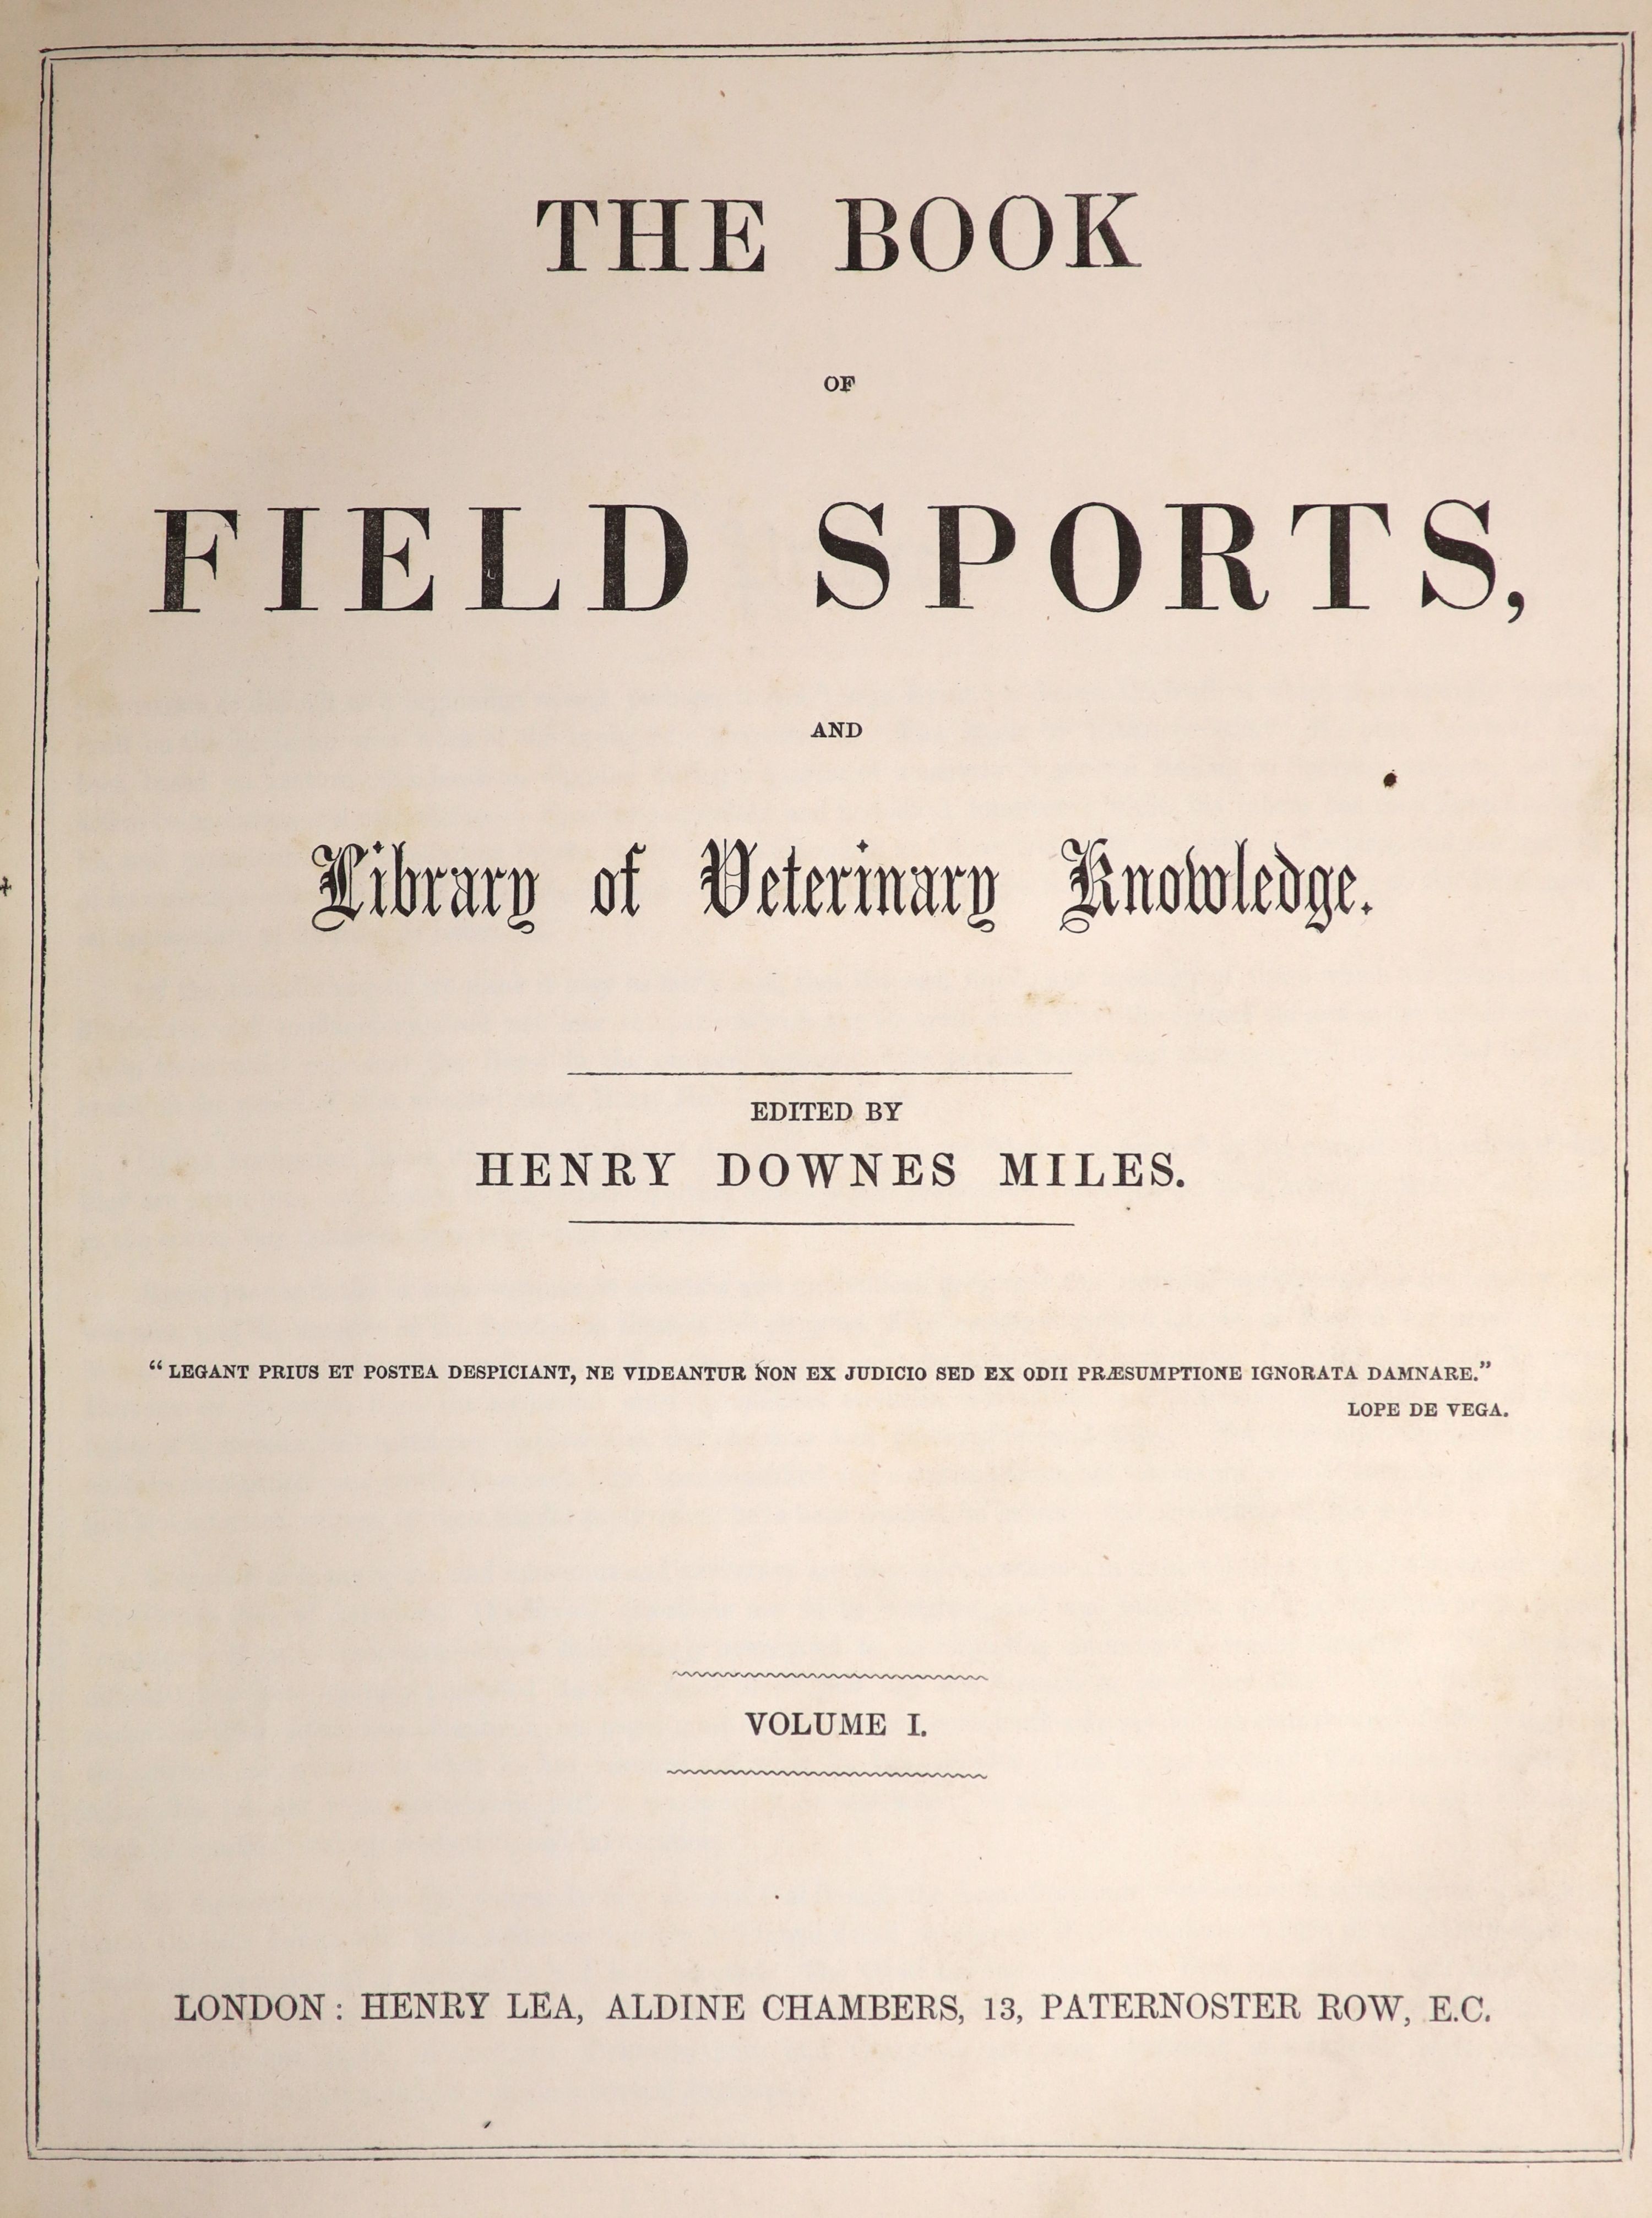 ° Miles, Henry Downes (editor) - The Book of Field Sports, and Library of Veterinary Knowledge. 2